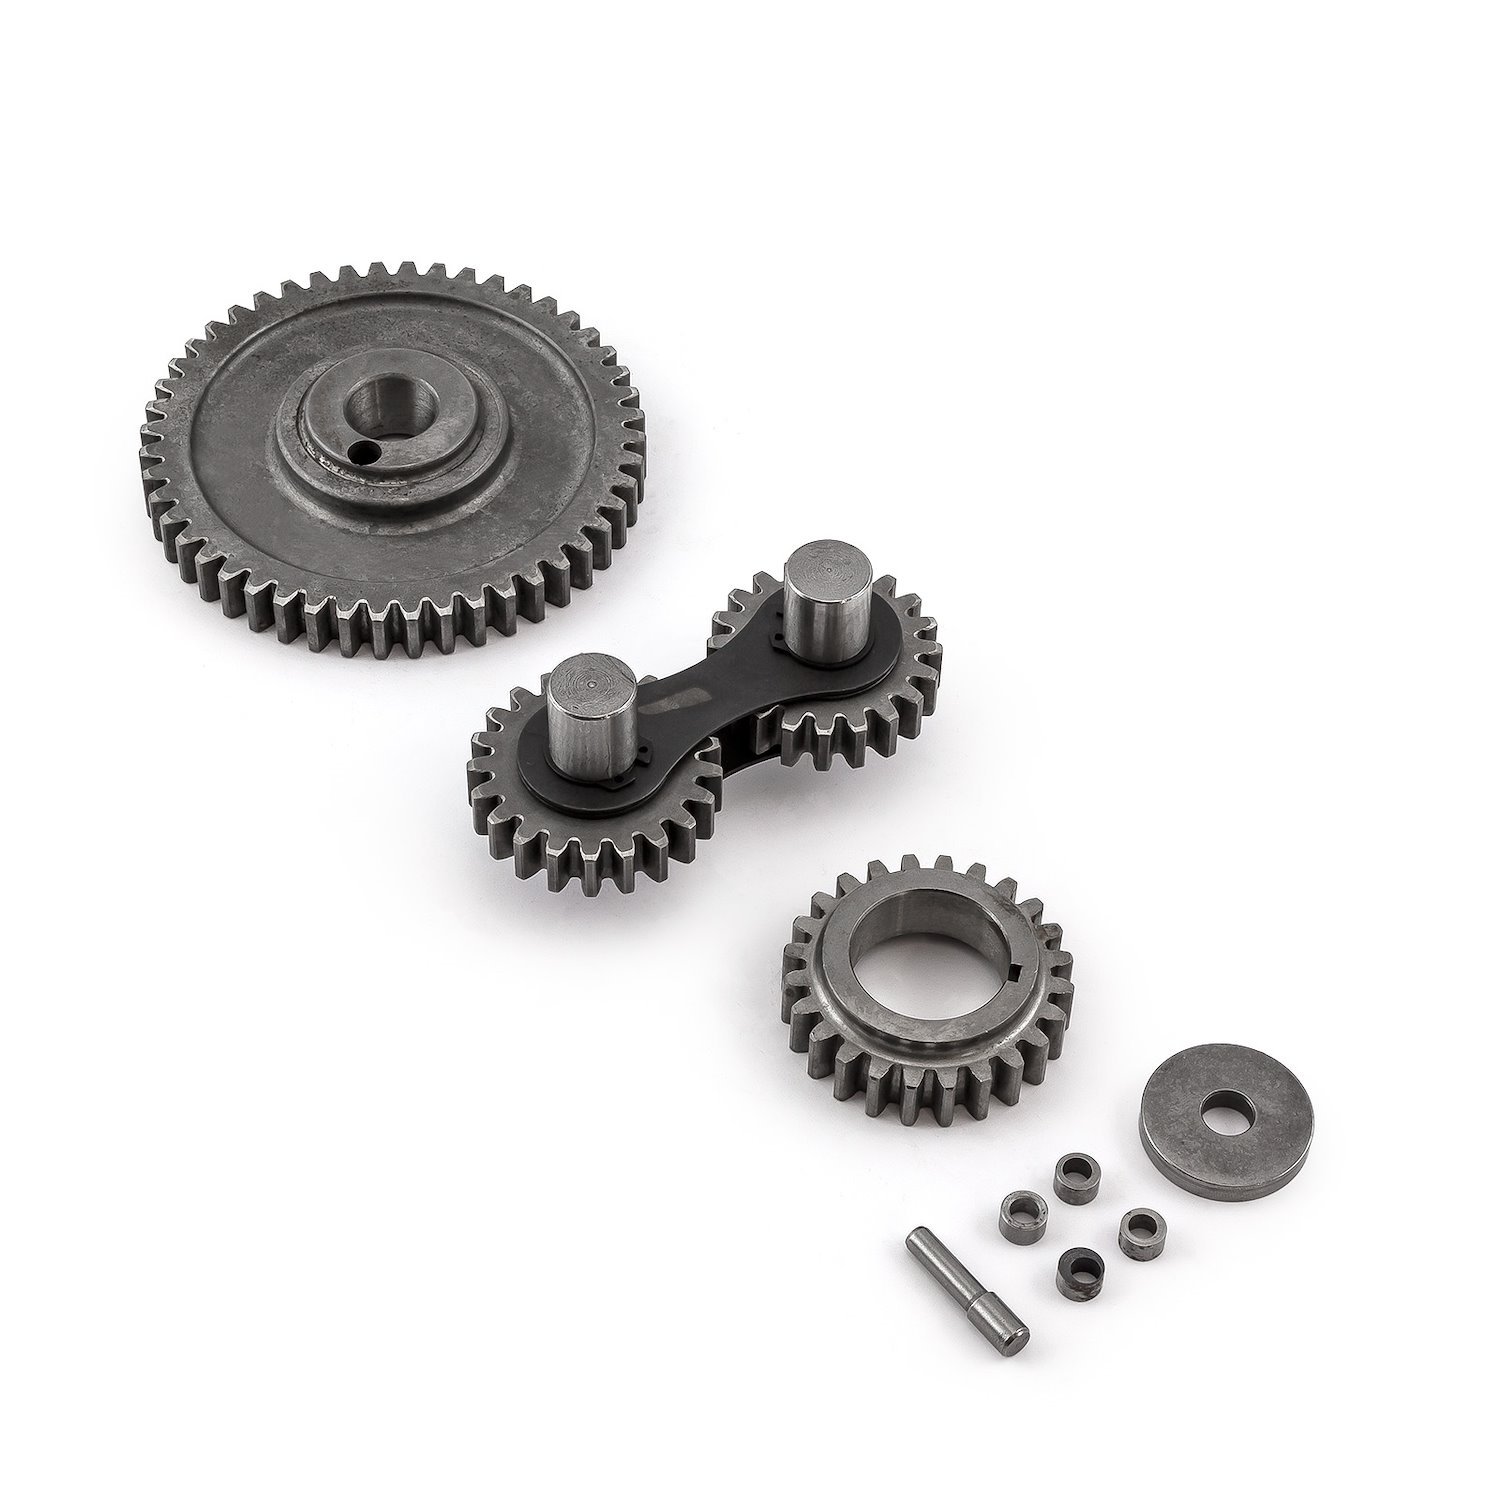 Dual Idler Noisy Timing Gear Drive Set for Ford 302 Boss/351C